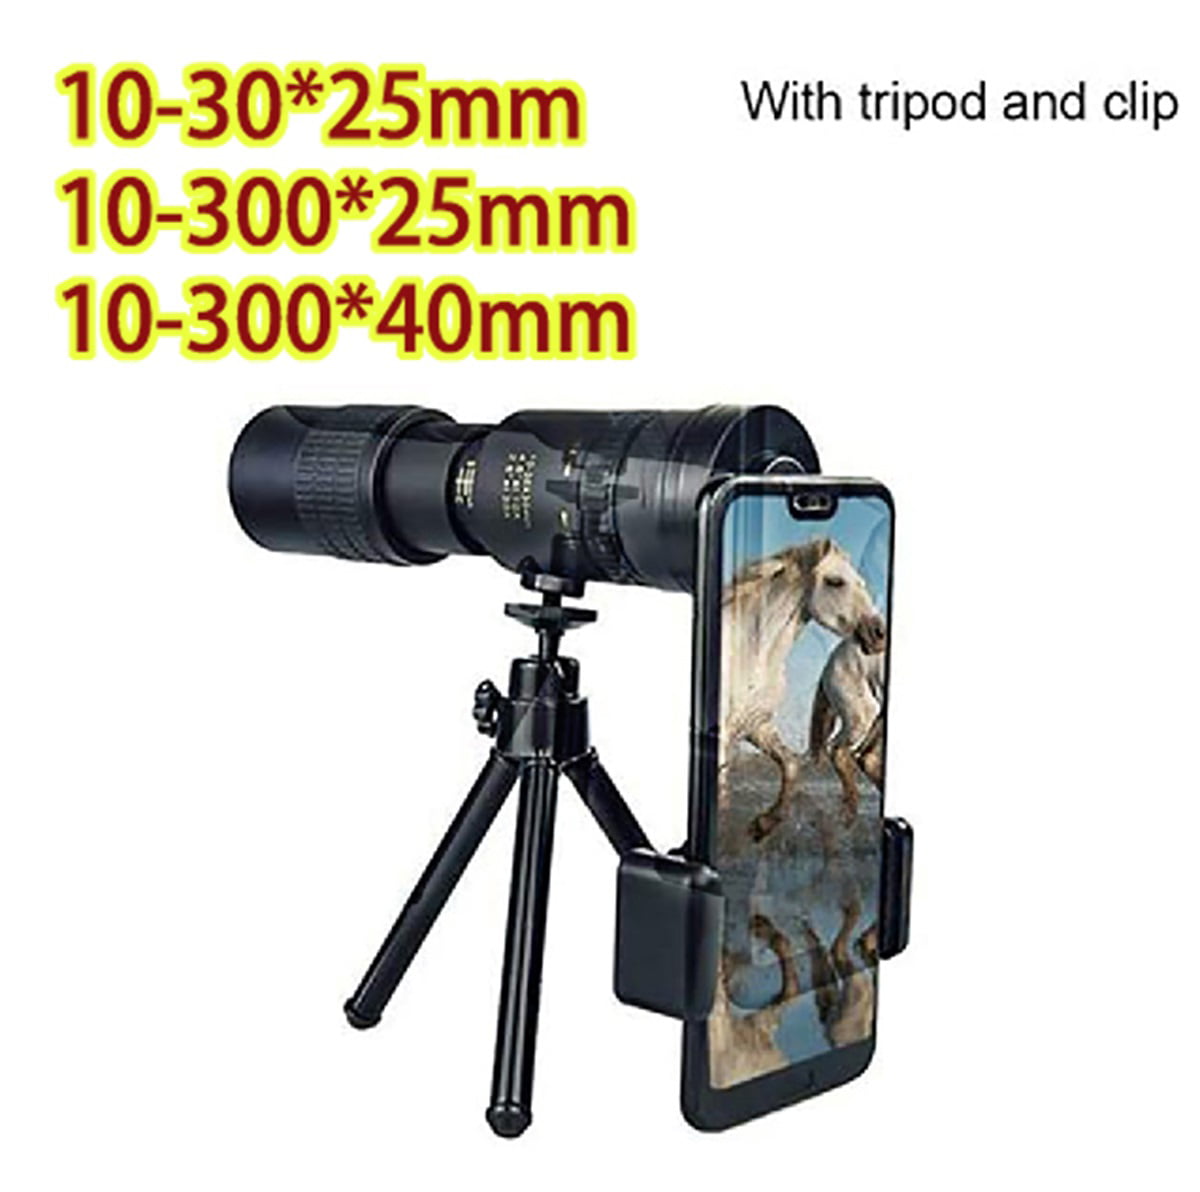 XAQPLM 4k 10-300x40mm Super telephoto Zoom Telescope monocular，with Smartphone Adapter Tripod Waterproof Durable and Clear Prism Dual Focus for Hiking Camping Travel 